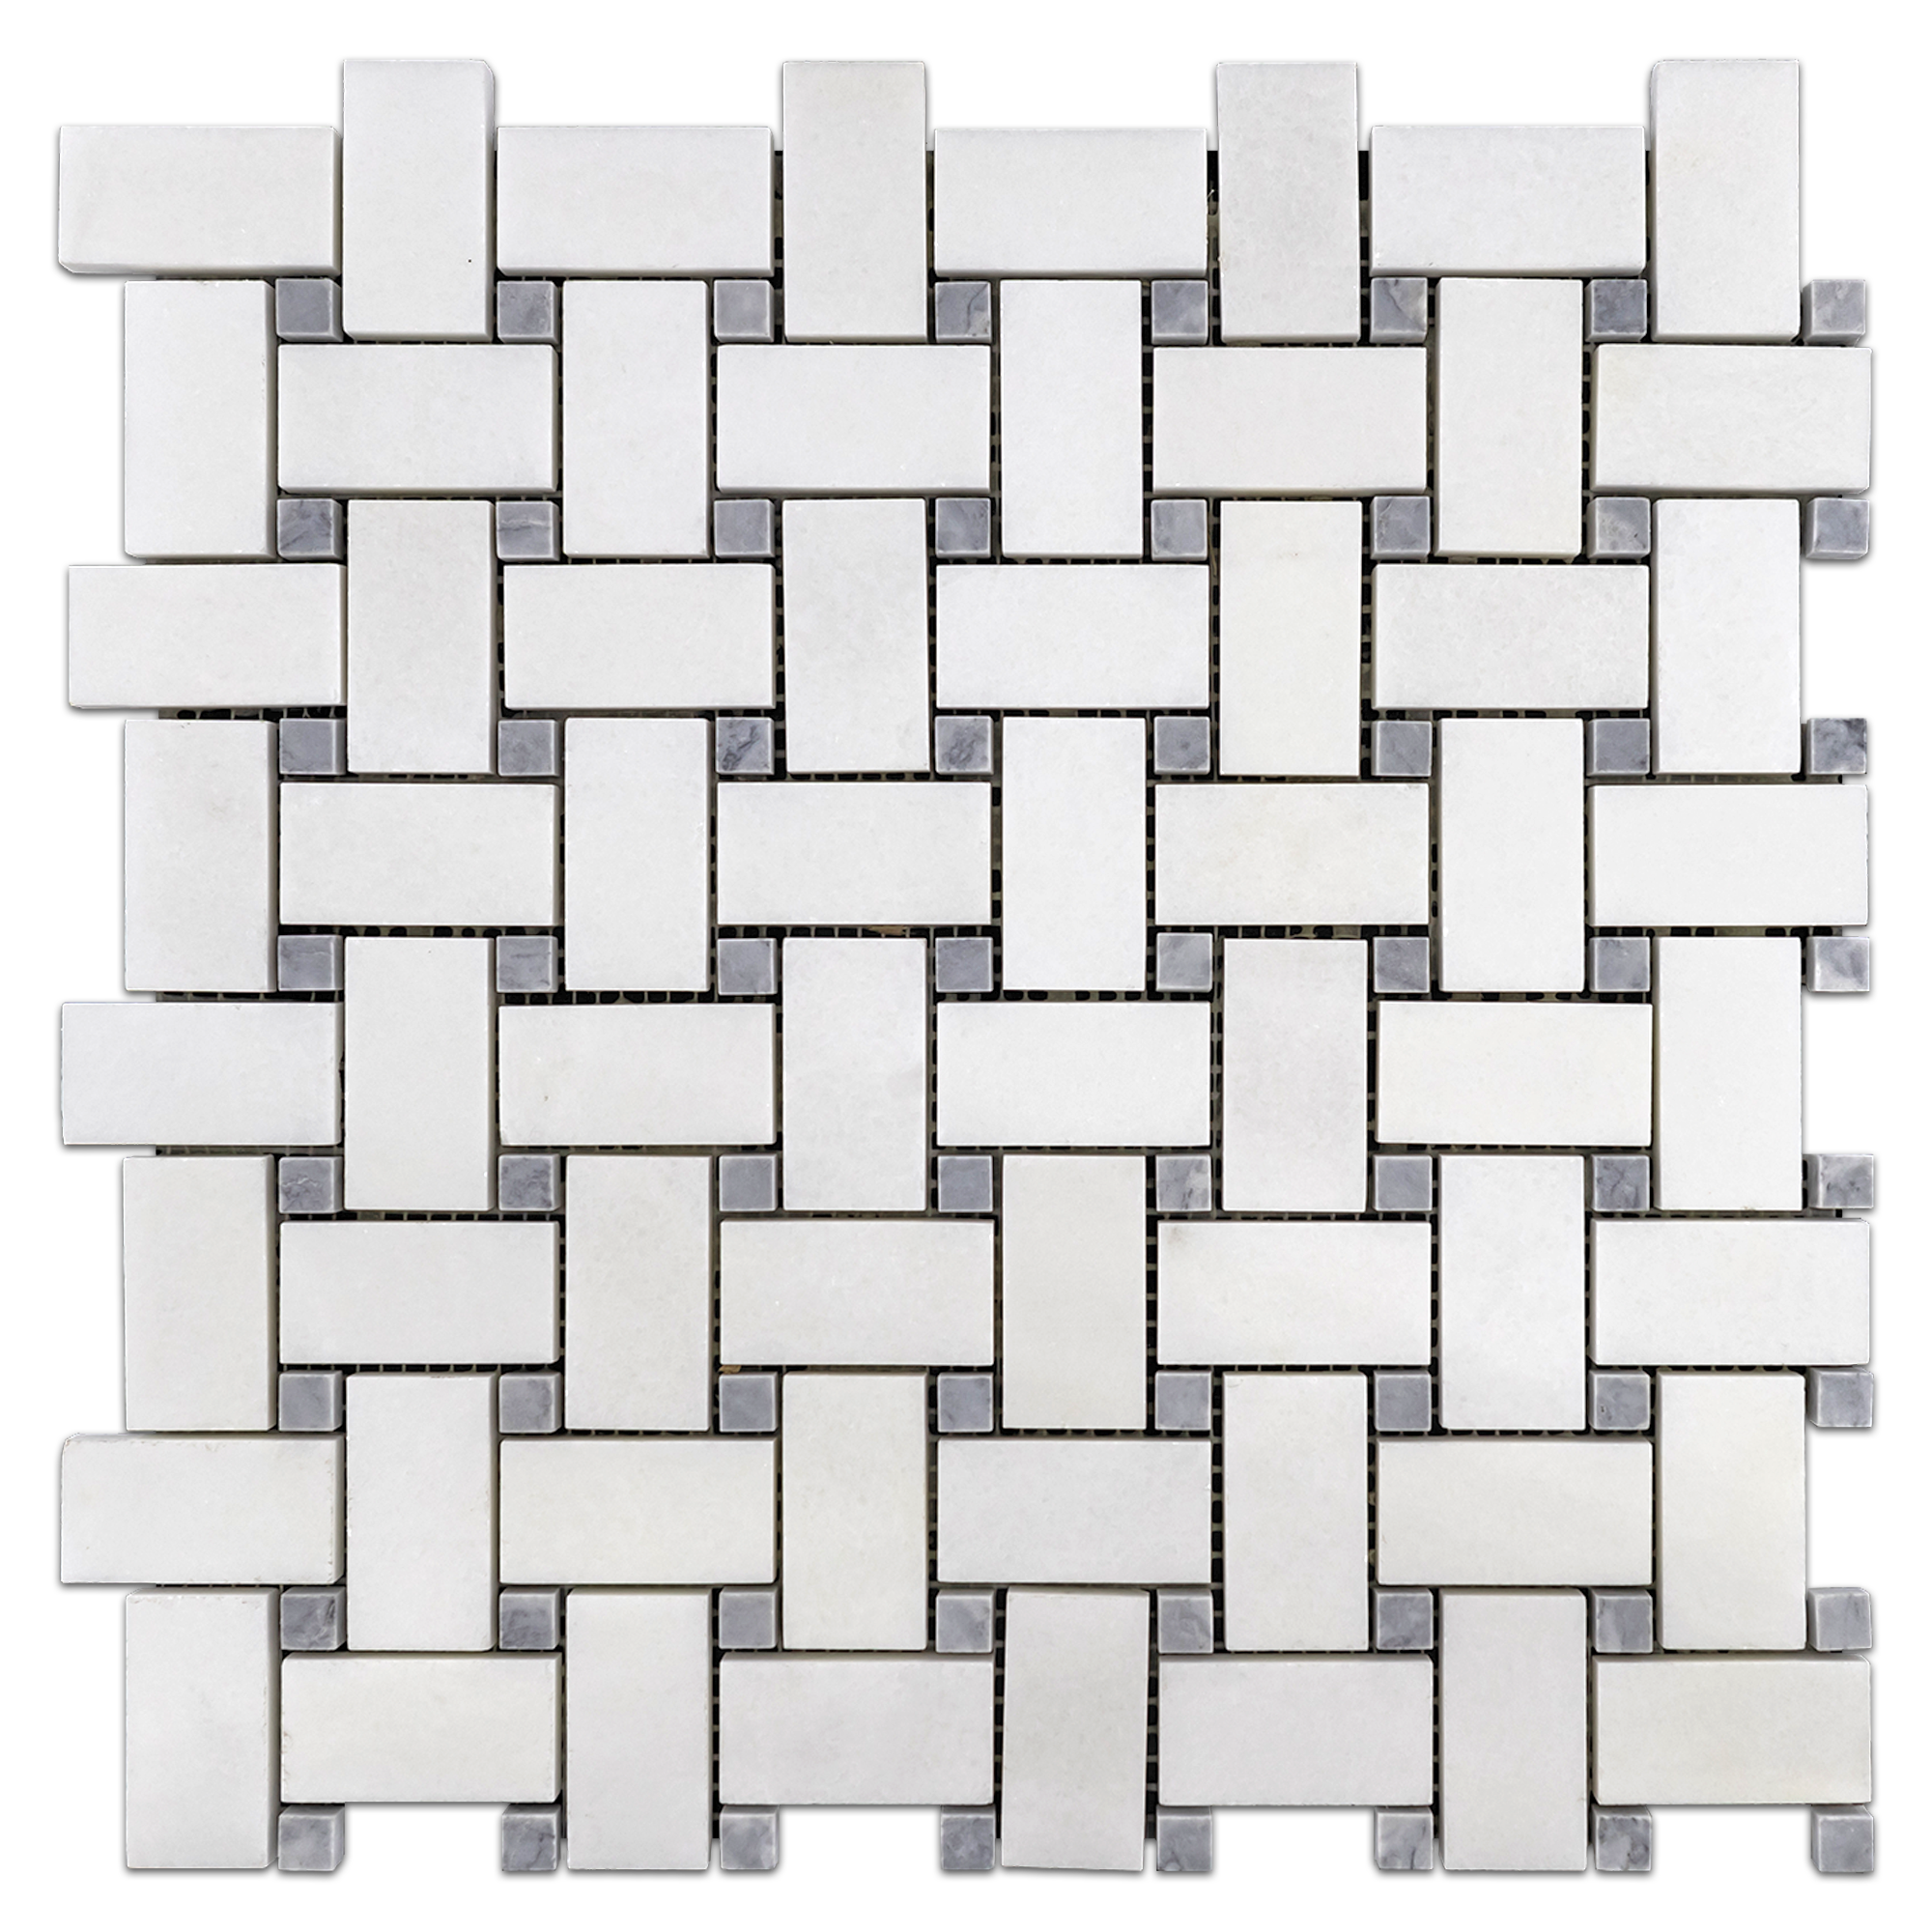 Elon White Thassos Pacific Gray Marble Stone Blend Basketweave Field Mosaic 12x12x0.375 Honed AM9048H Surface Group International Product